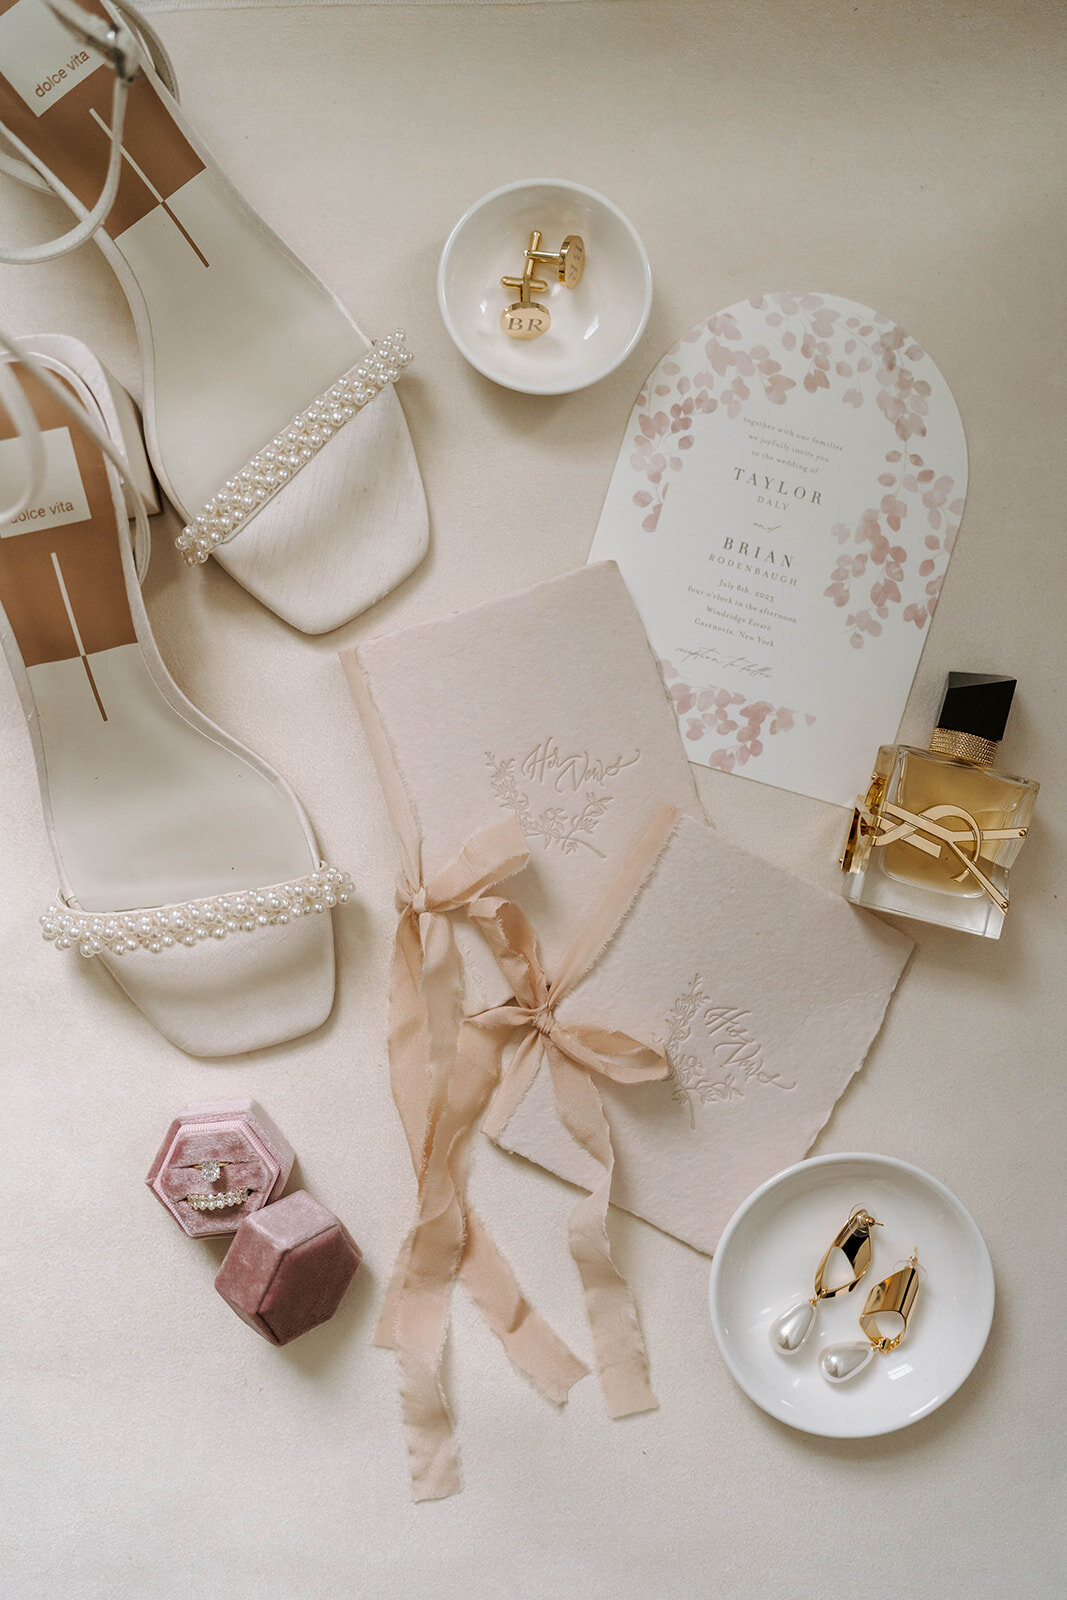 wedding bridal details flatlay photo with heels, ysl perfume, vow book, and jewelry